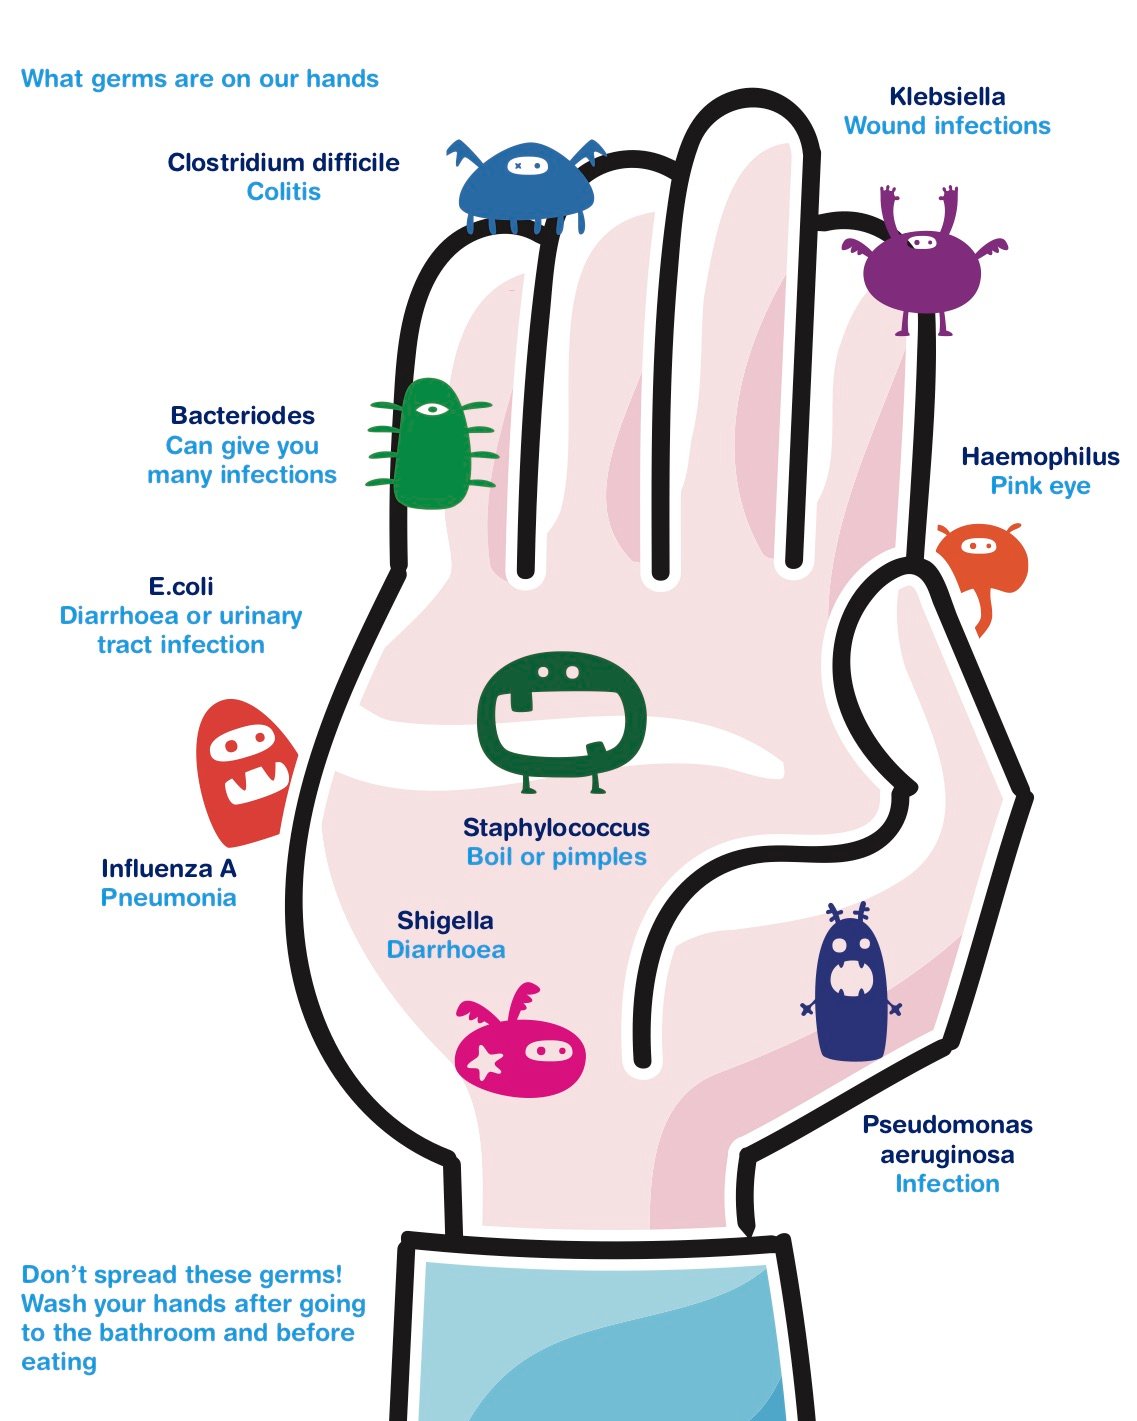 Hand hygiene is more important than most people realise